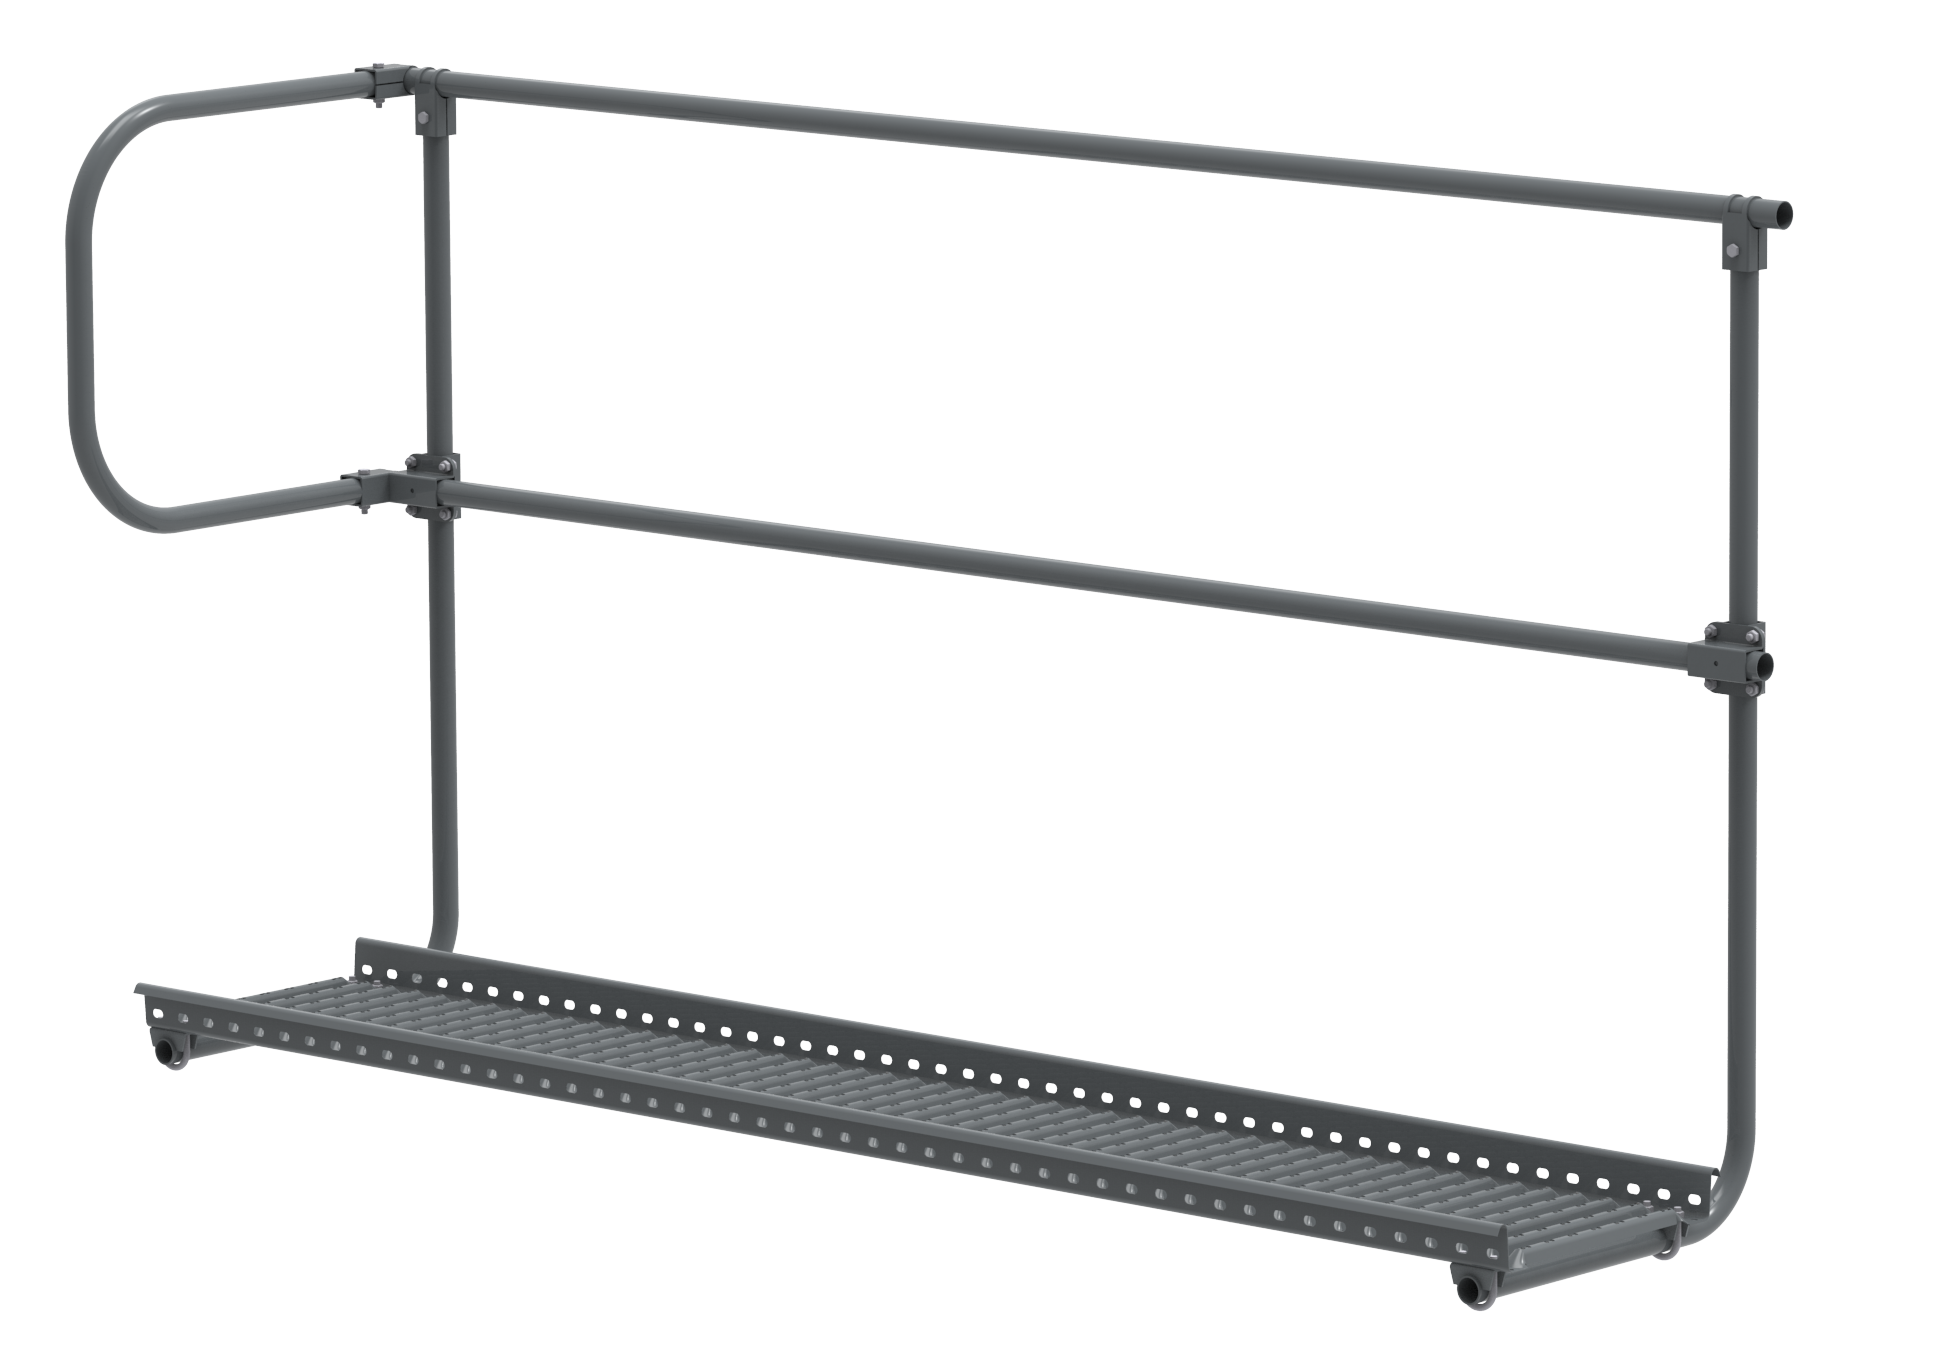 Pisko roof walkway with safety railing